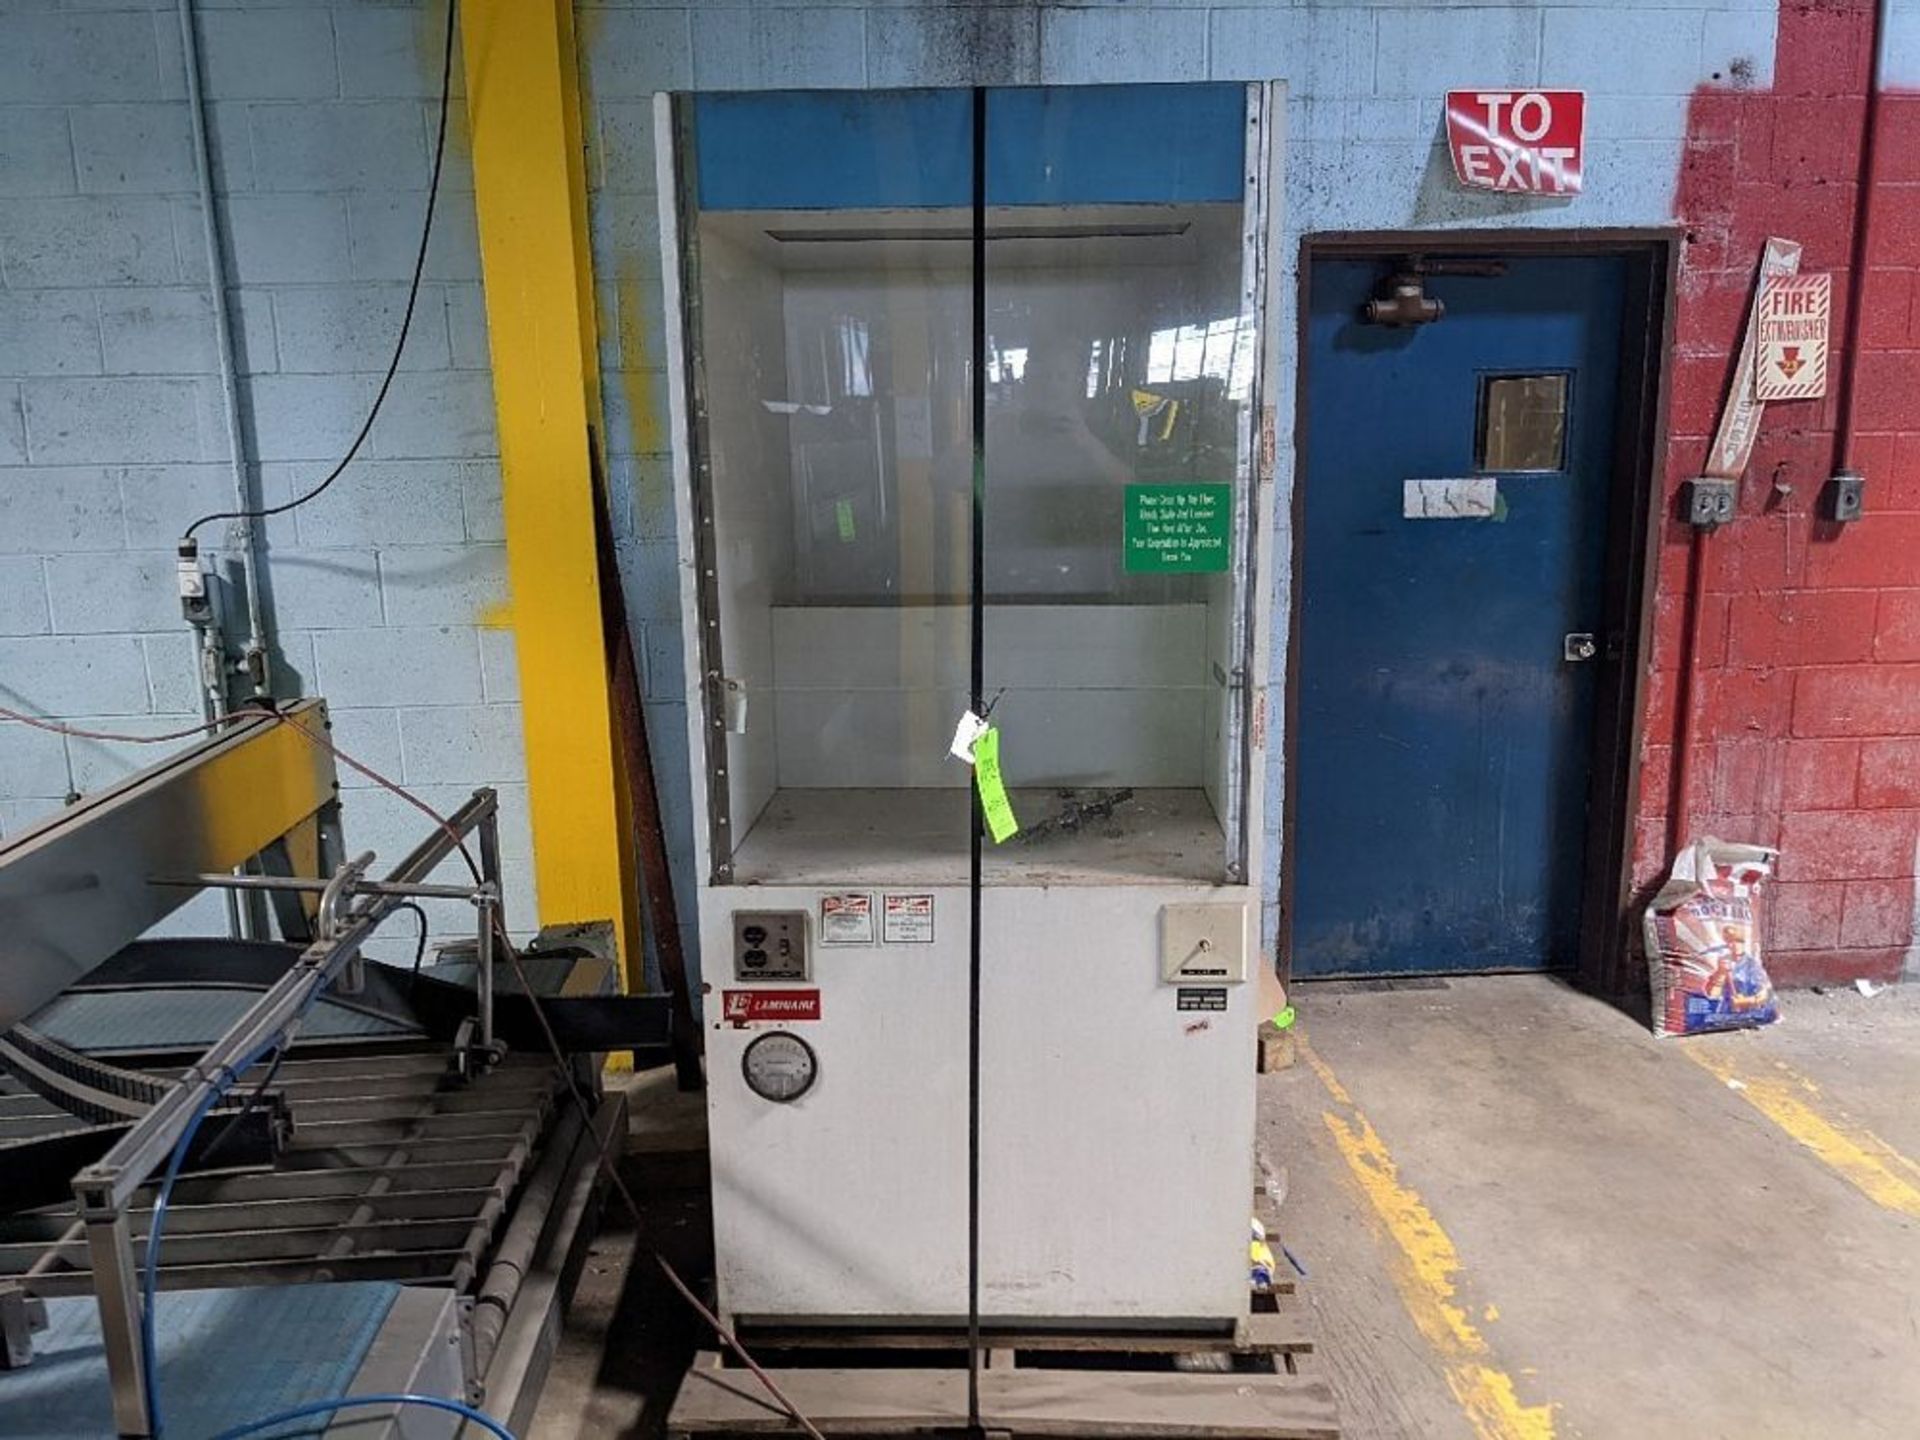 Qty (1) Laminaire Laminar Flow Hood - 34' wide x 39' deep x 76' high. - Working hooded area is 32-